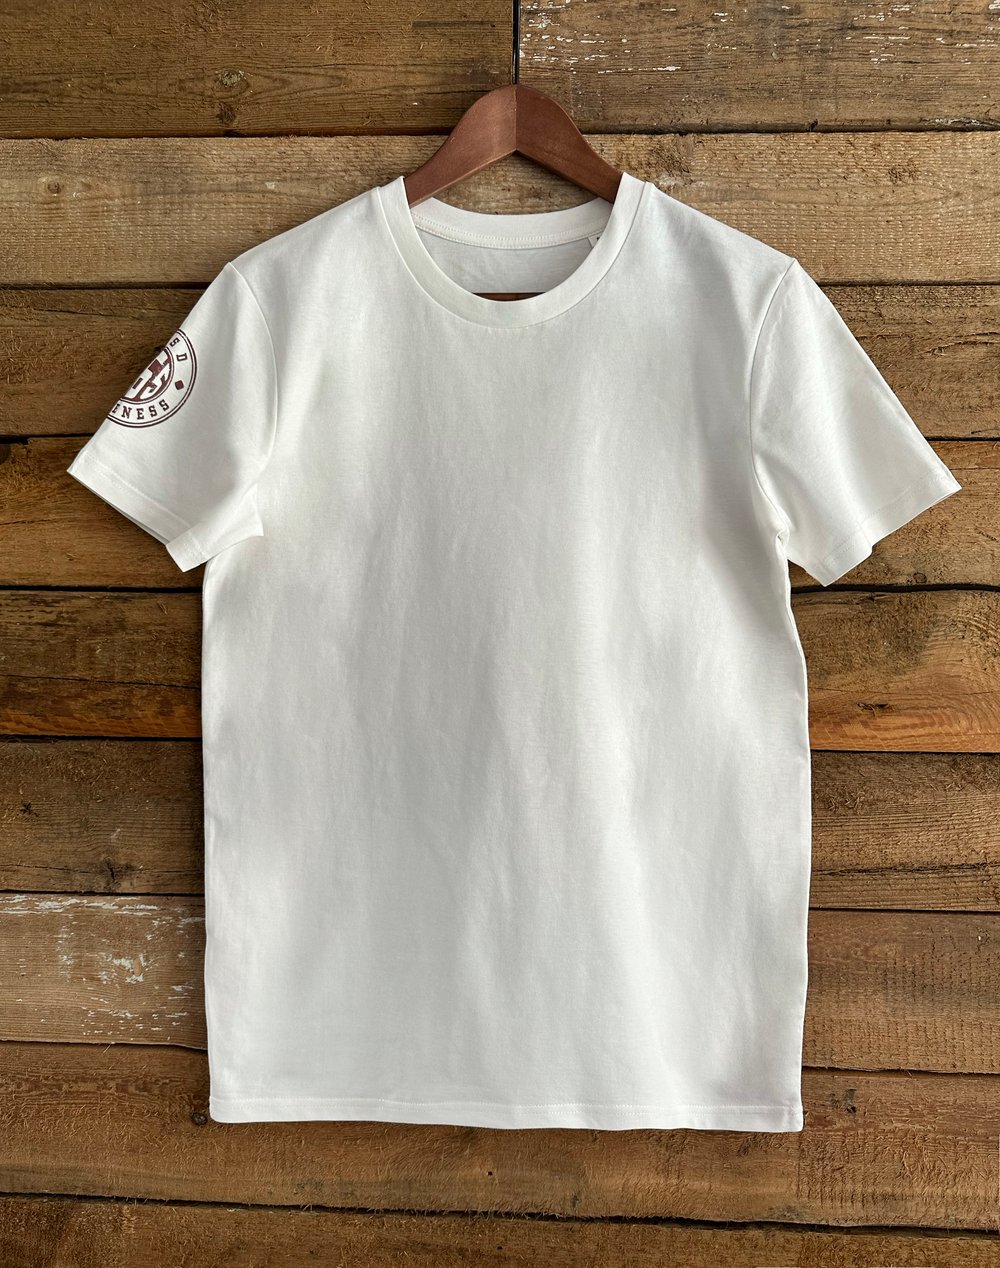 1965 PTSD Recovery T shirt Off White